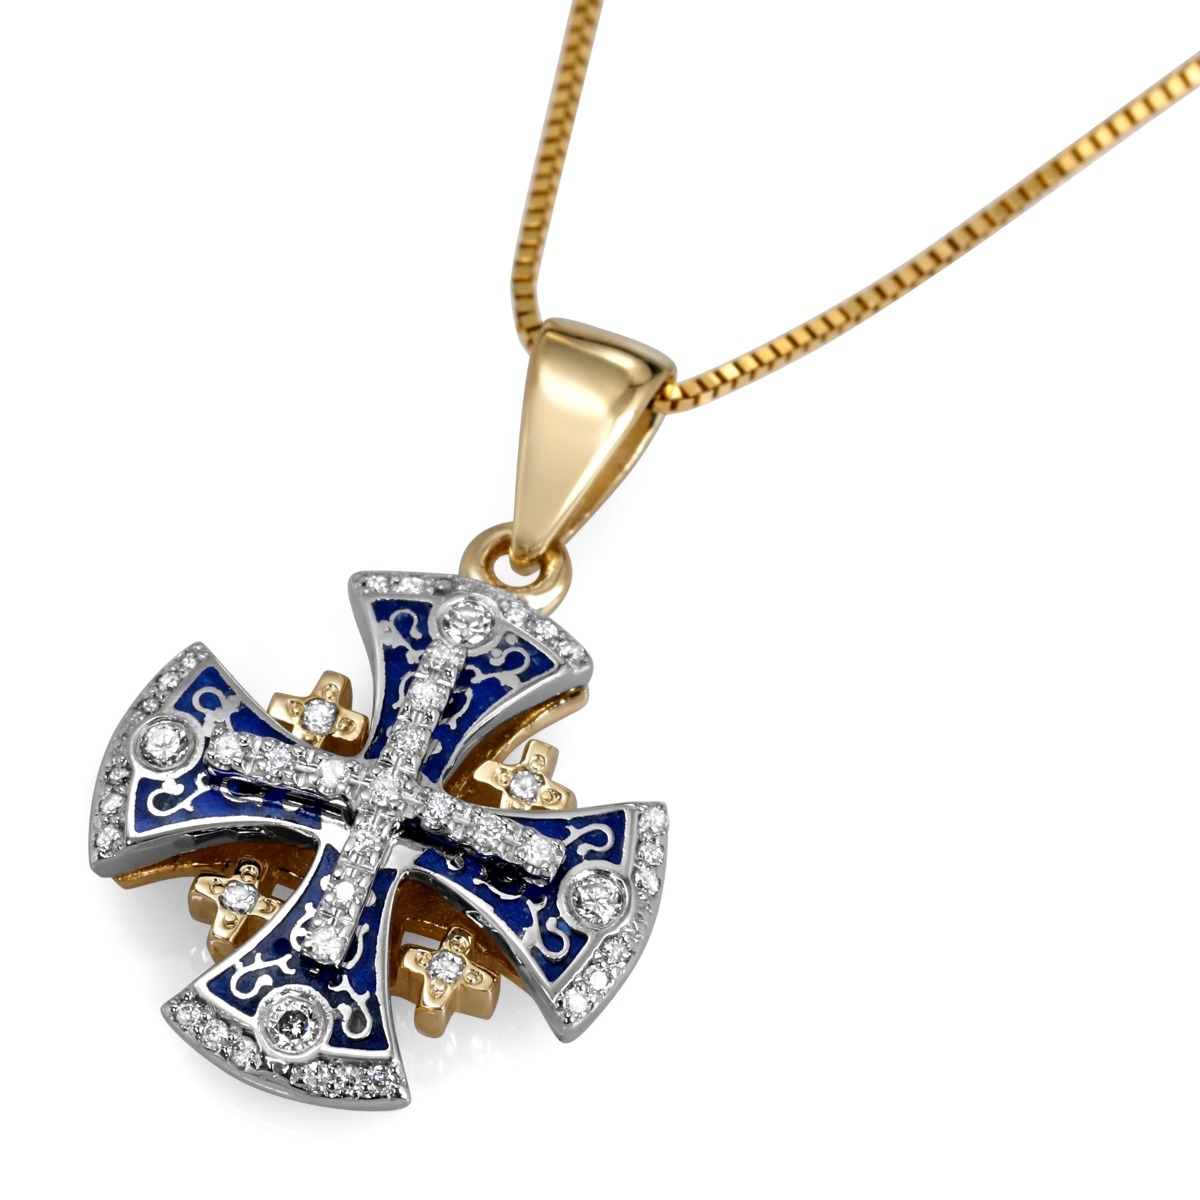 Anbinder Deluxe Two-Tone 14K Gold, Diamond and Enamel Splayed Jerusalem Cross Pendant with Ornate Design and 45 Diamonds - 1